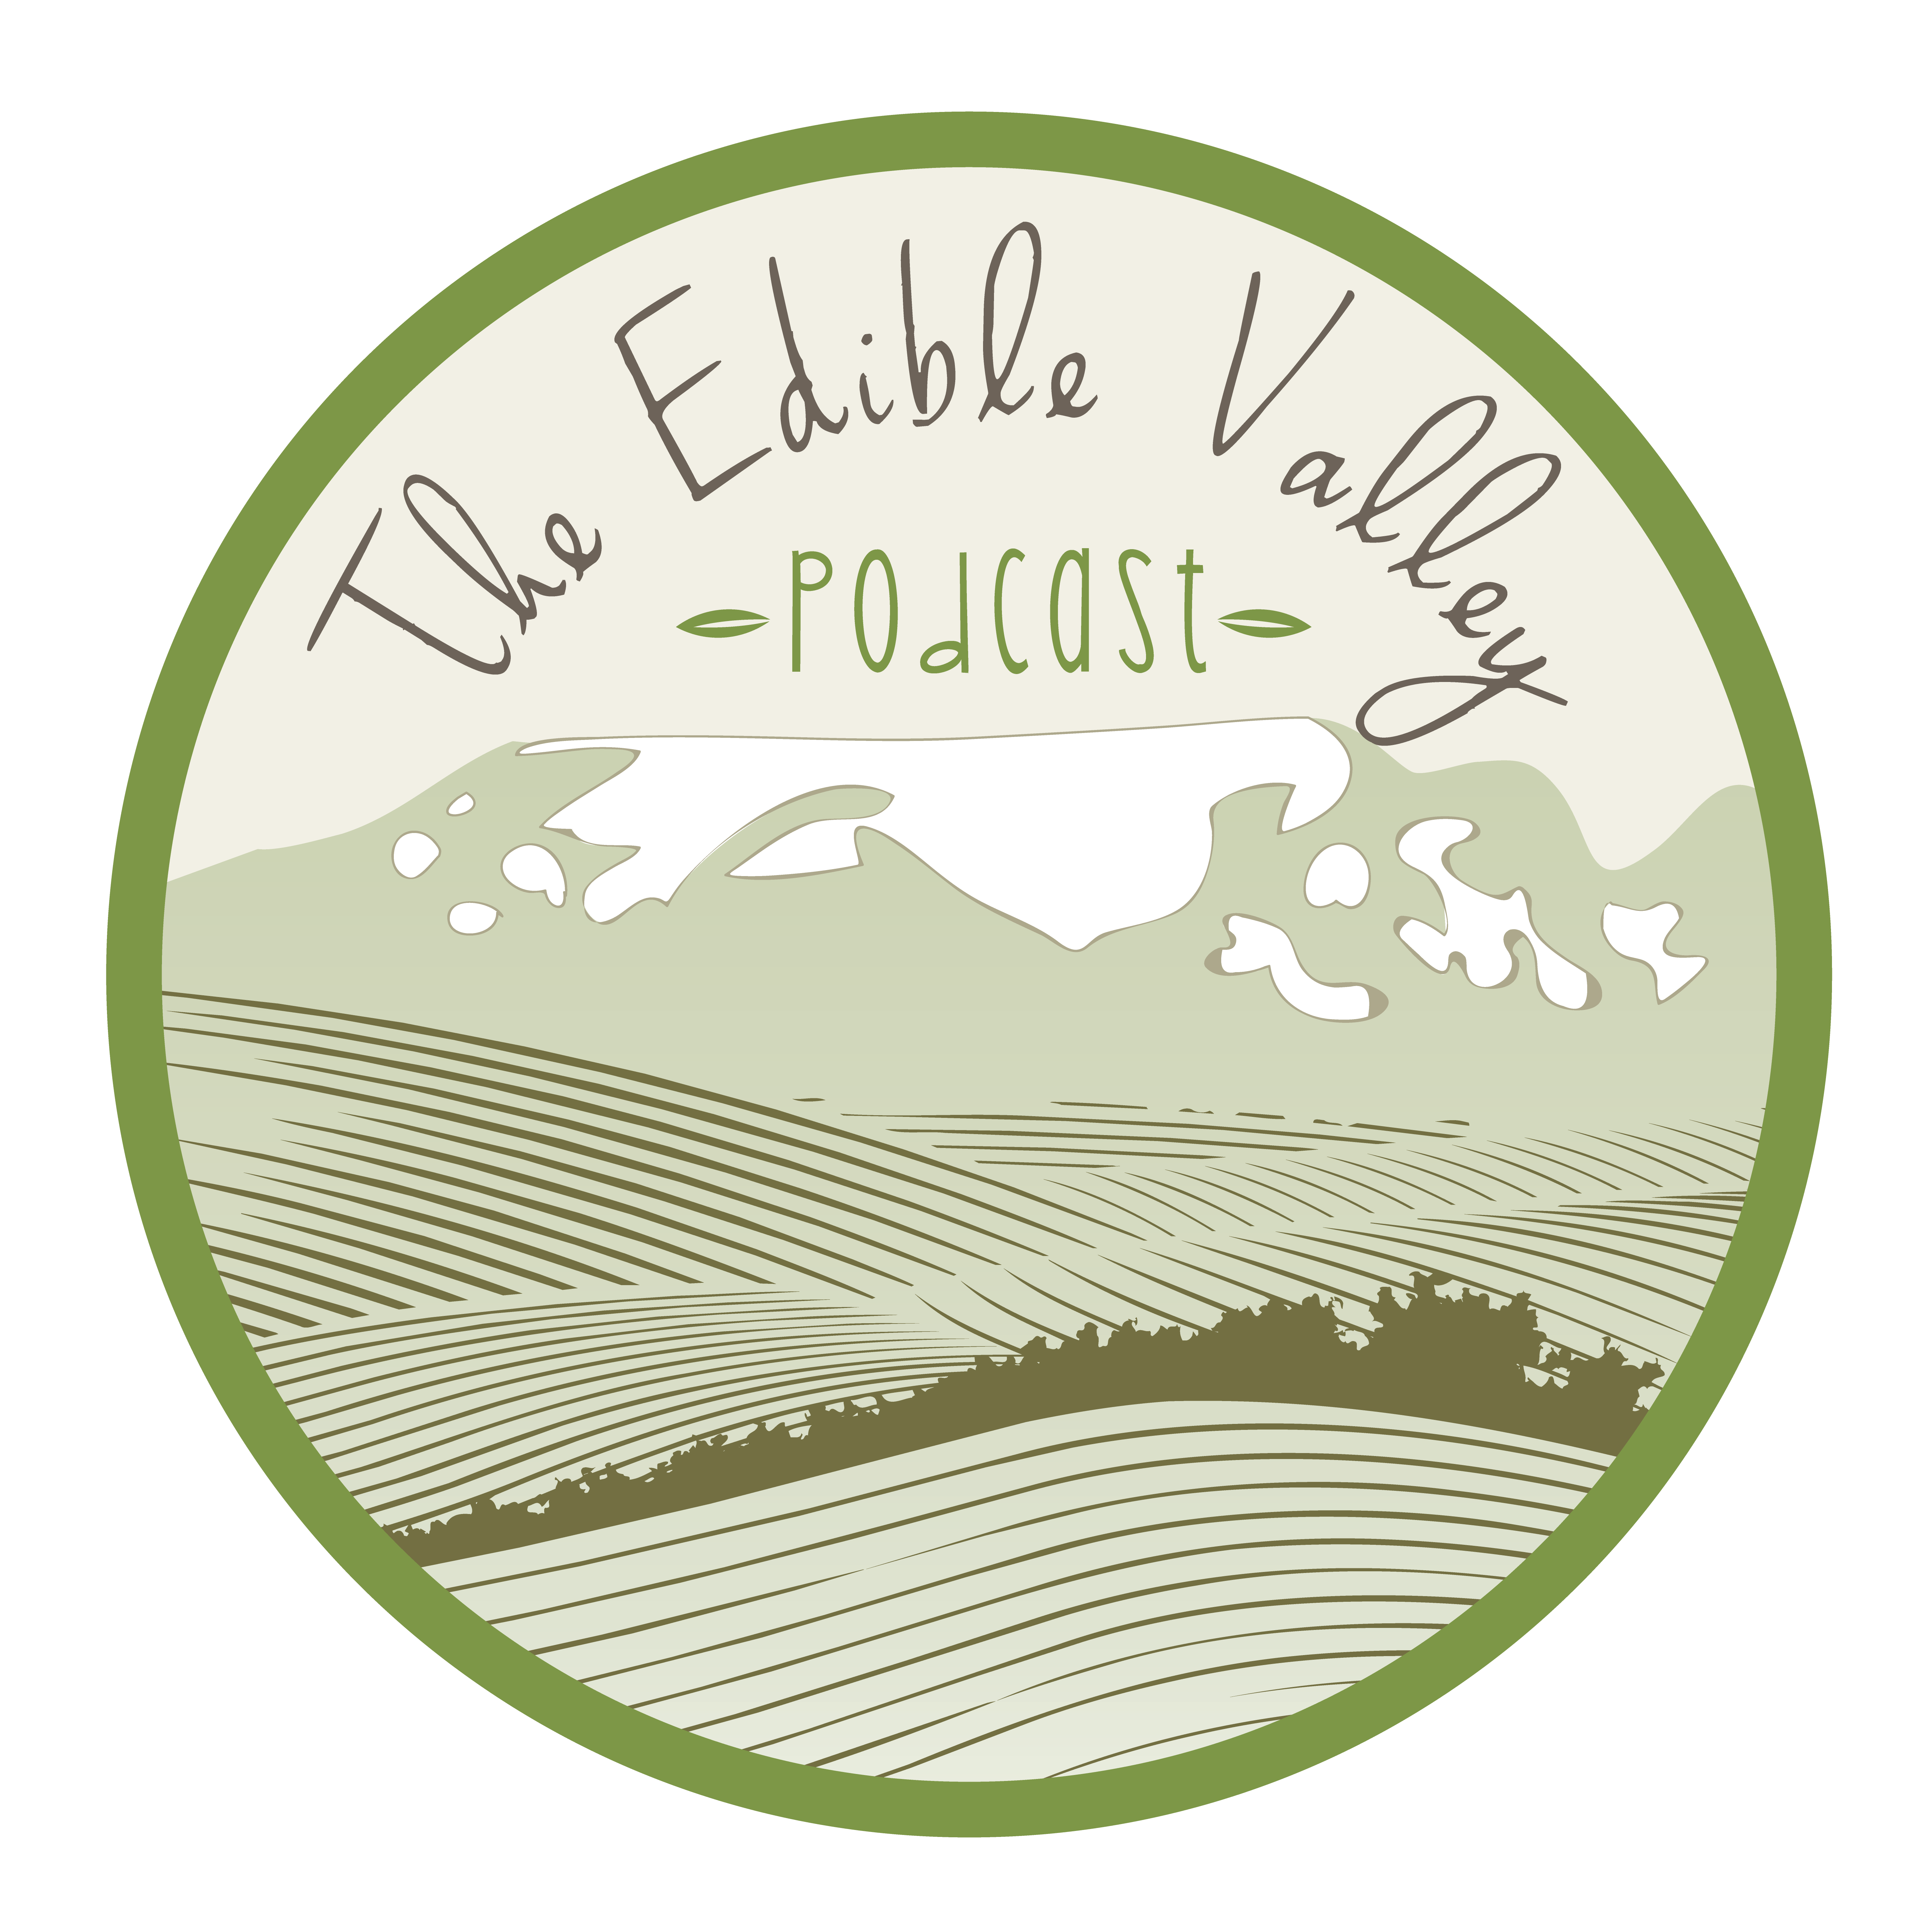 Episode 91 " February in the Edible Valley"